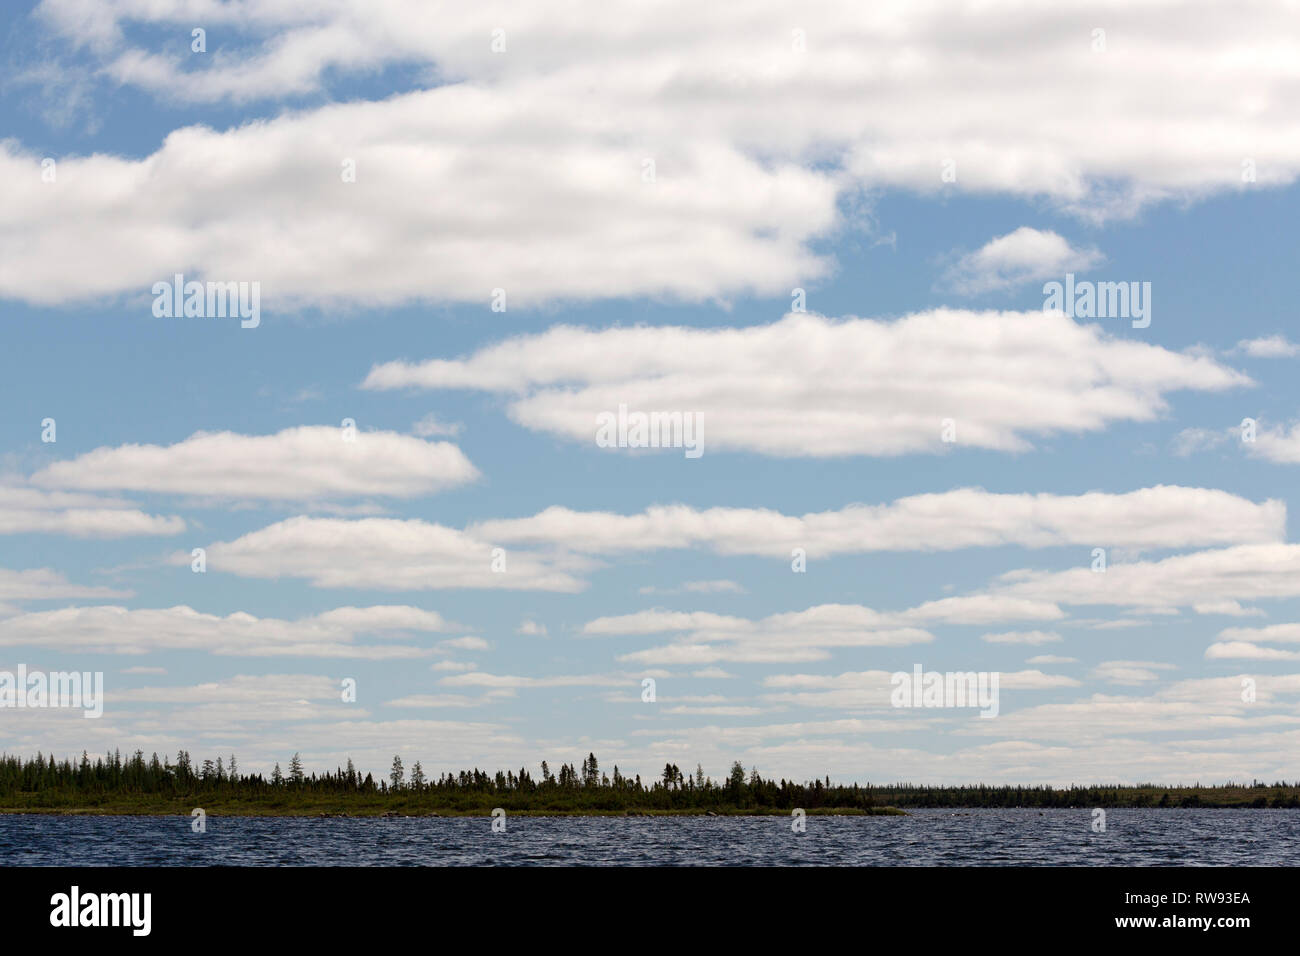 Clouds above a lake in northern Manitoba, Canada. The clouds are fluffy and white. Stock Photo